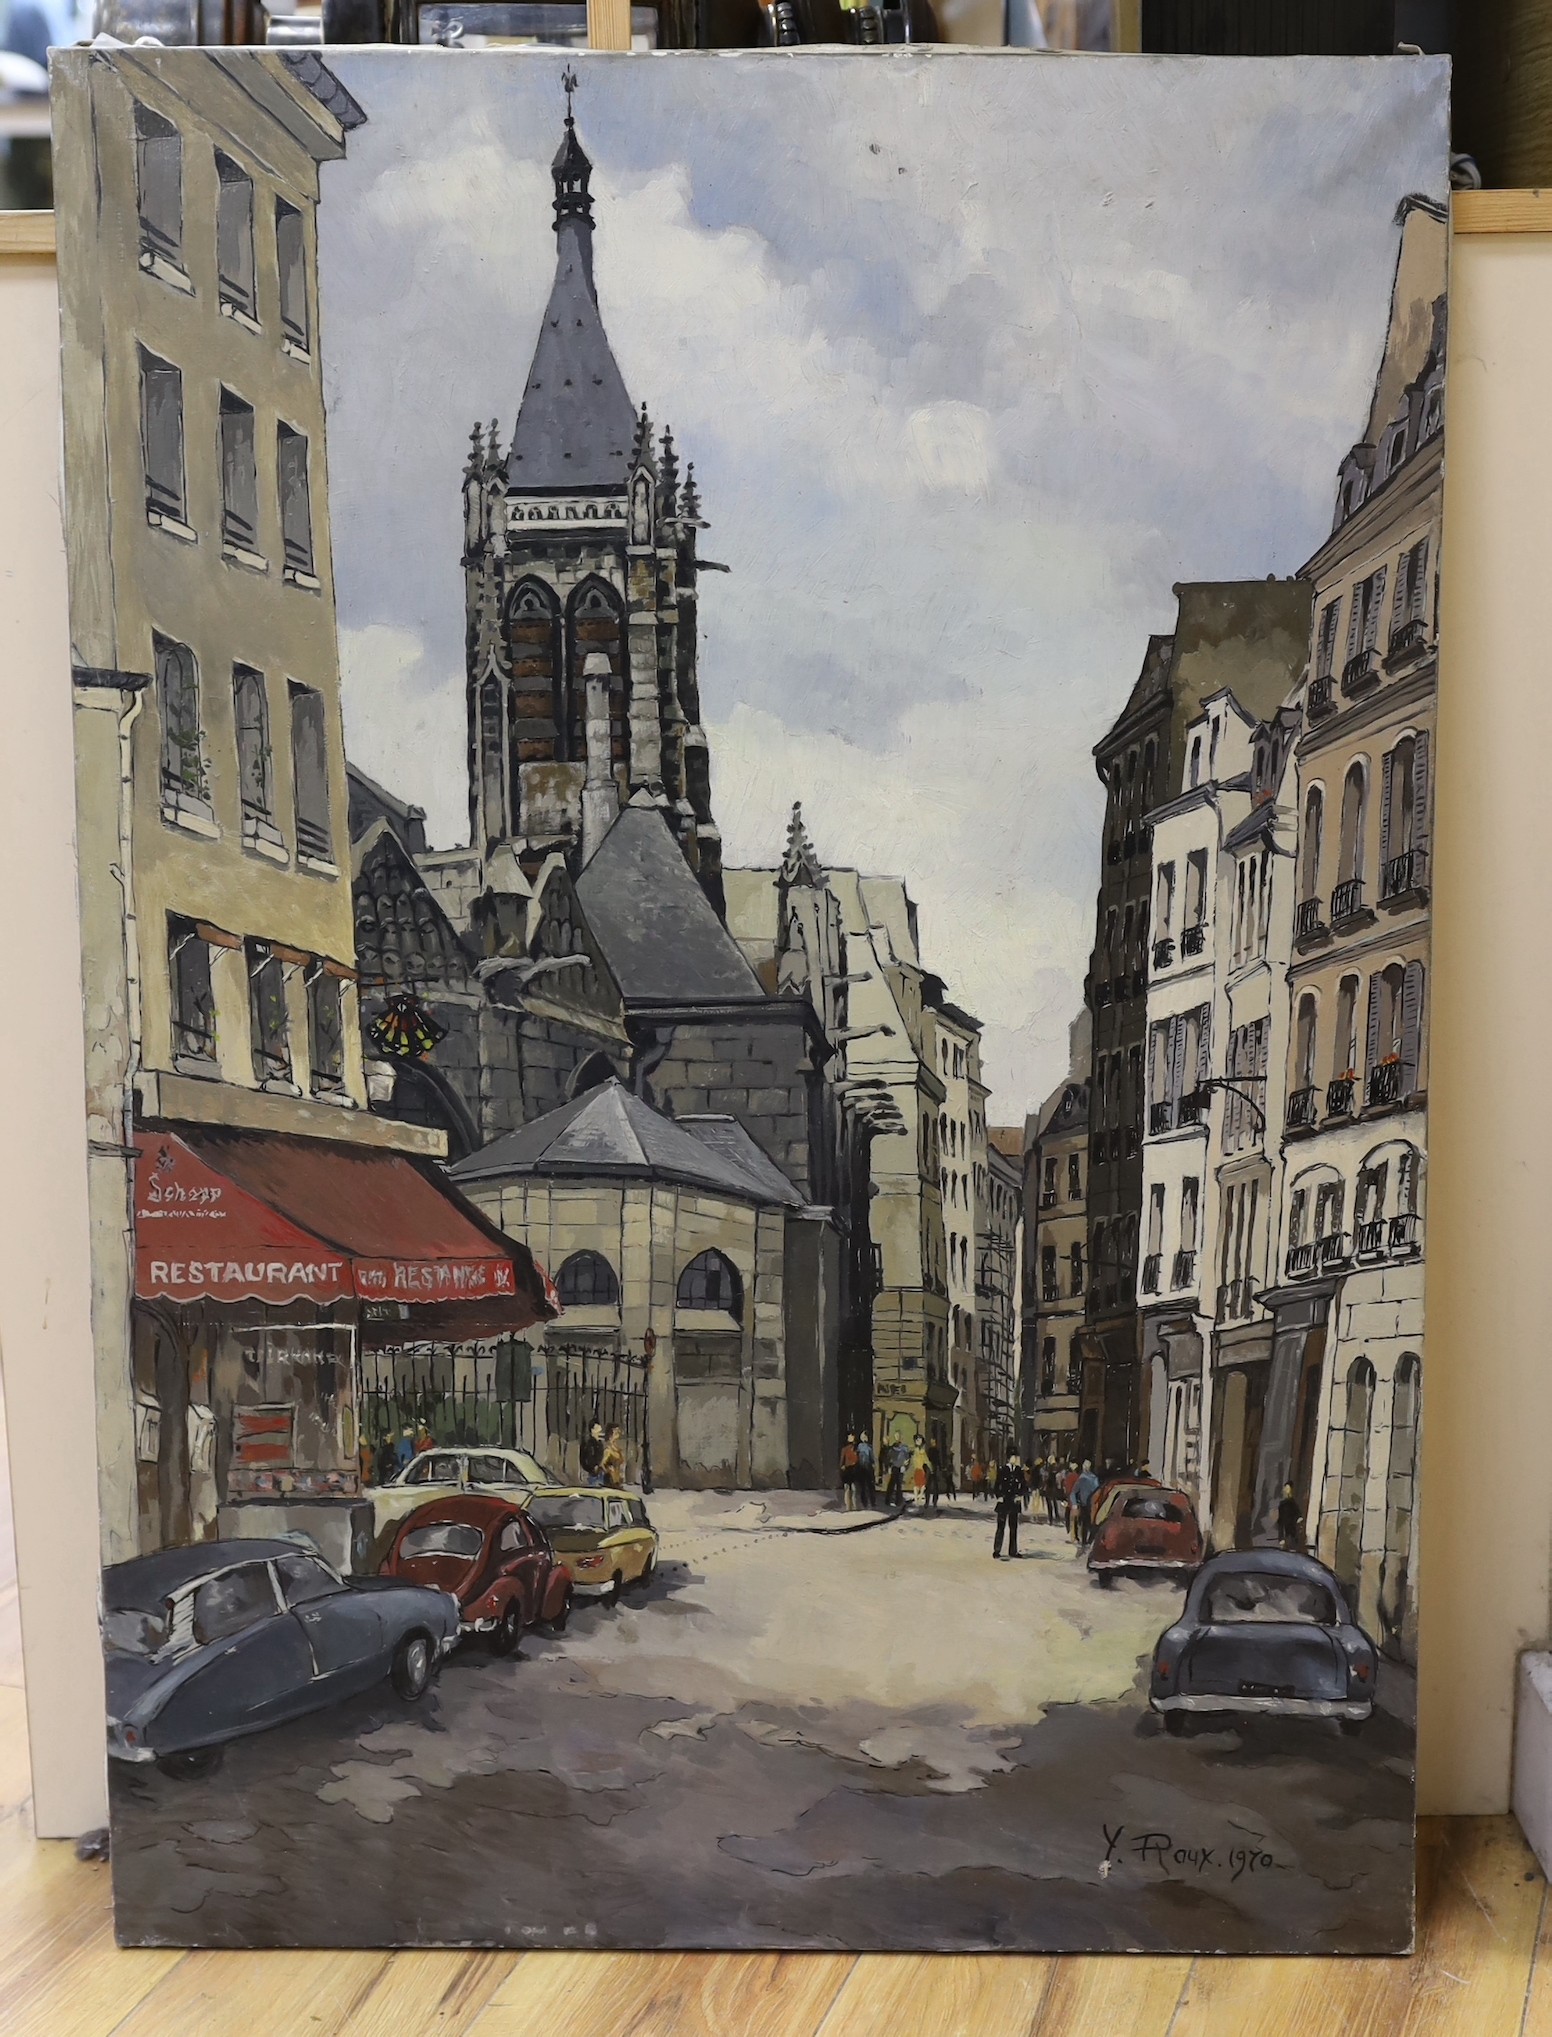 Y. Roux, oil on canvas, French street scene, signed and dated 1970, 92 x 65cm, unframed